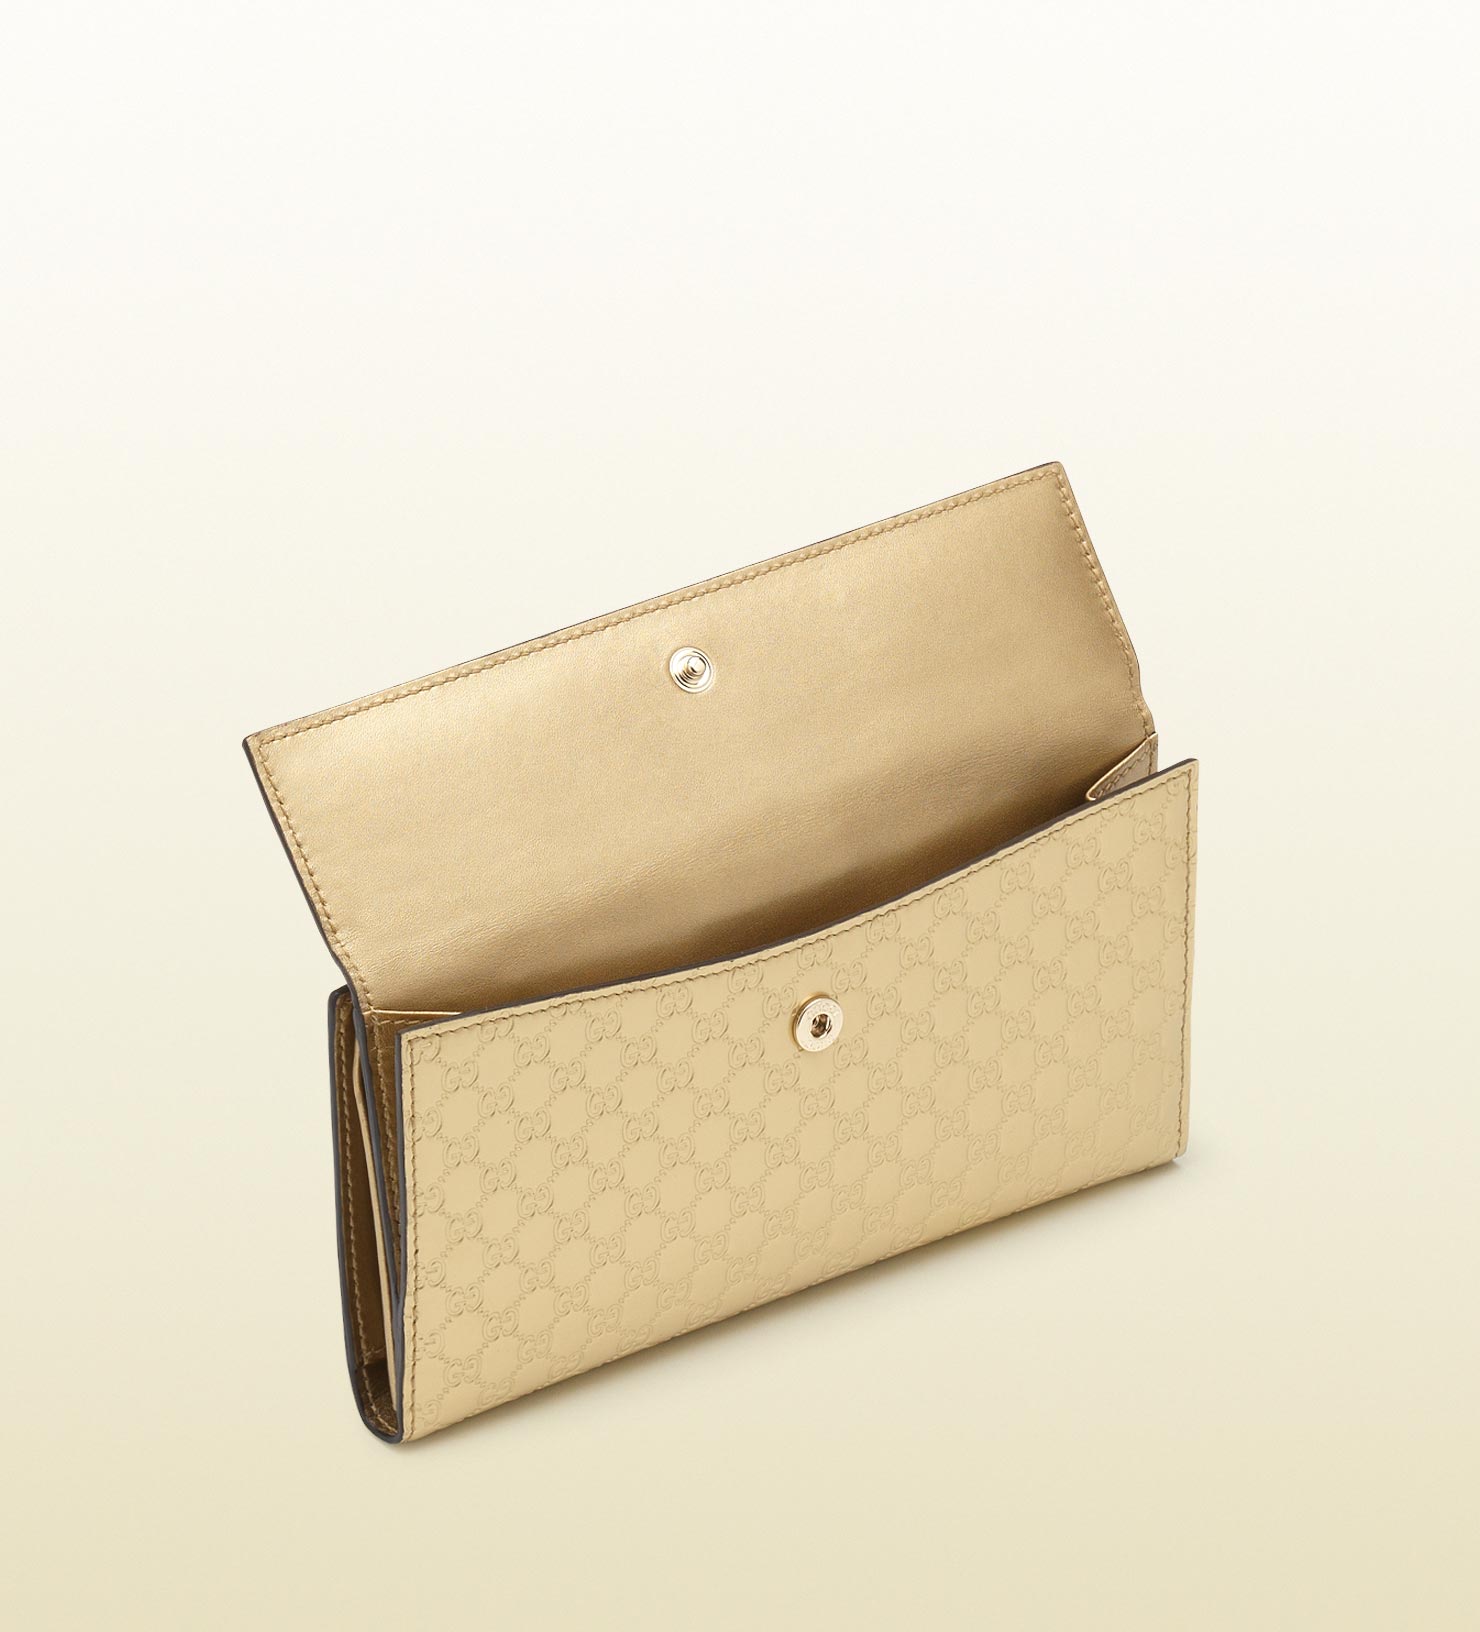 gucci gold wallet, OFF 75%,www 